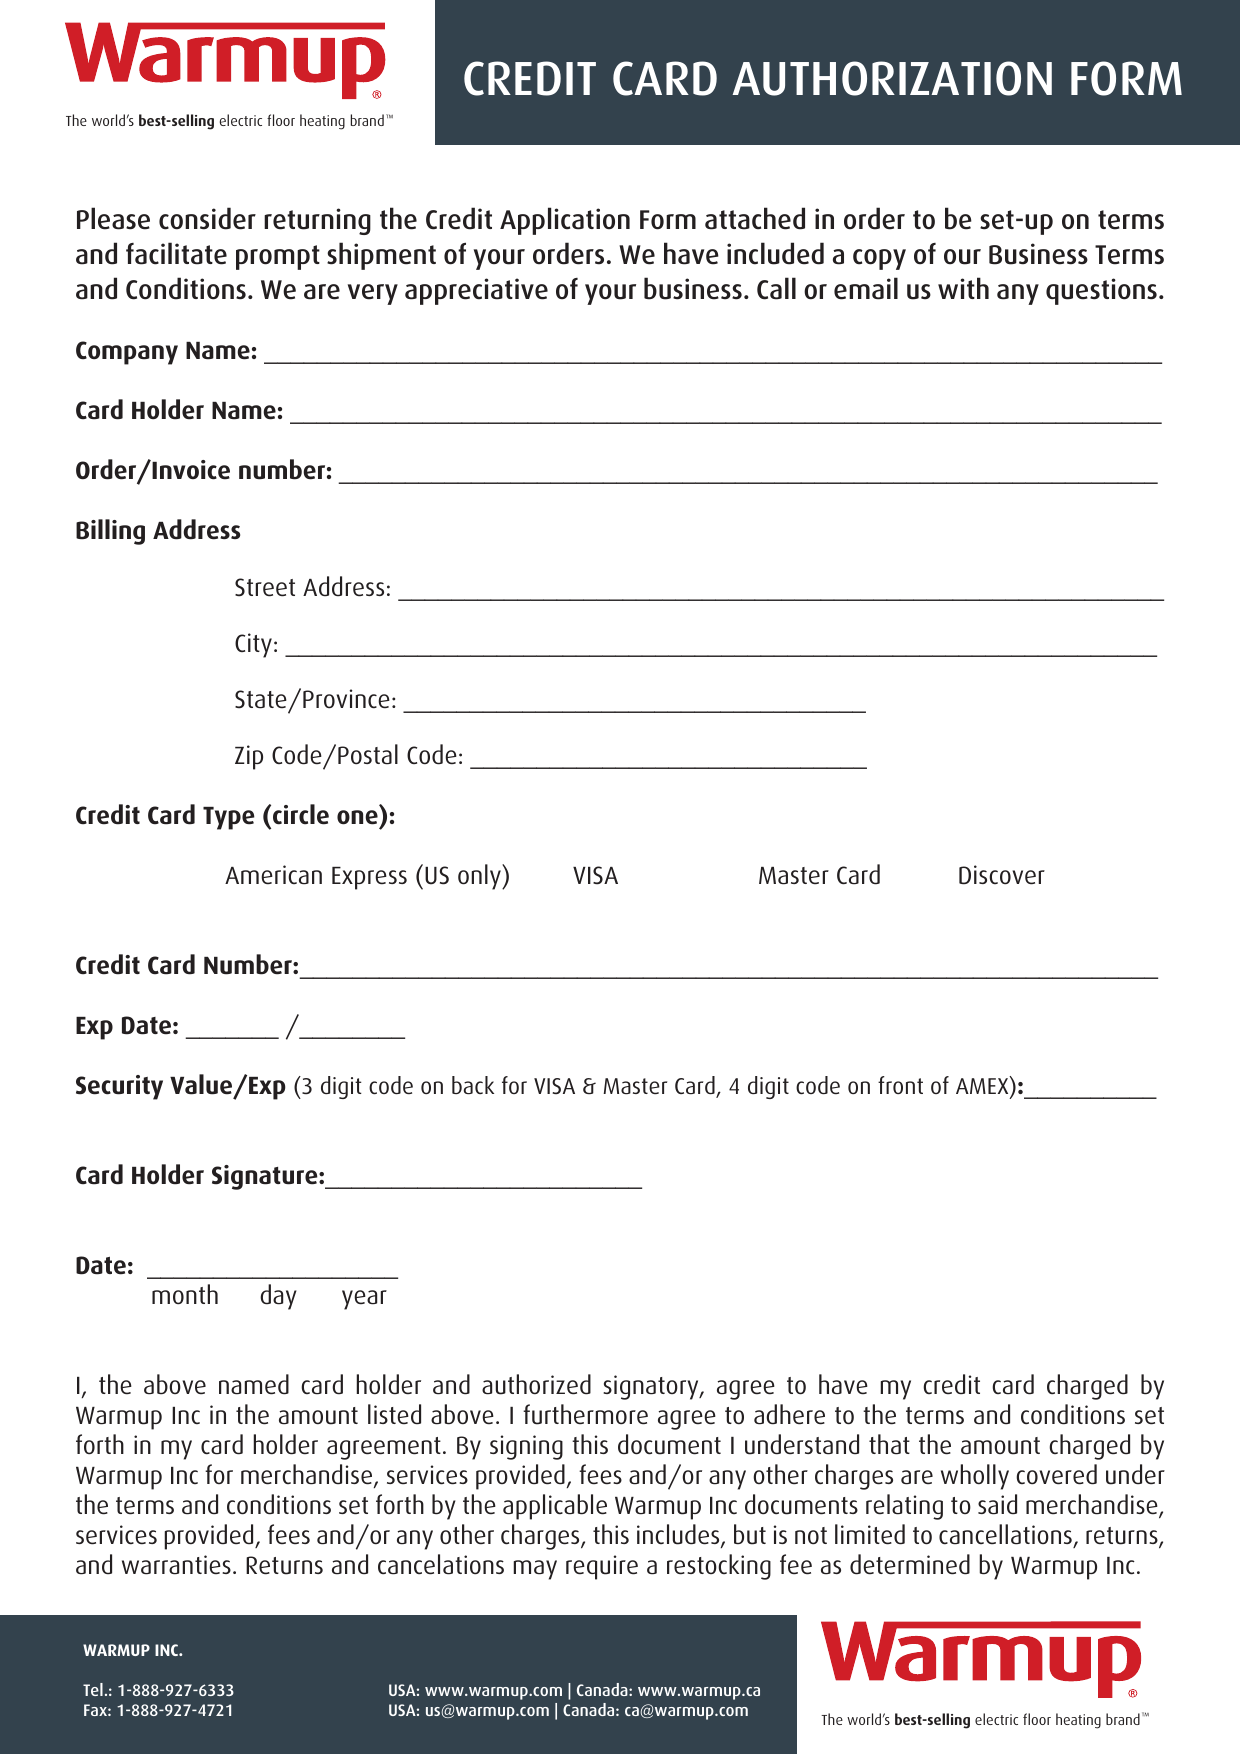 Page 1 of 1 - Credit-Card-Authorization-Form Warmup